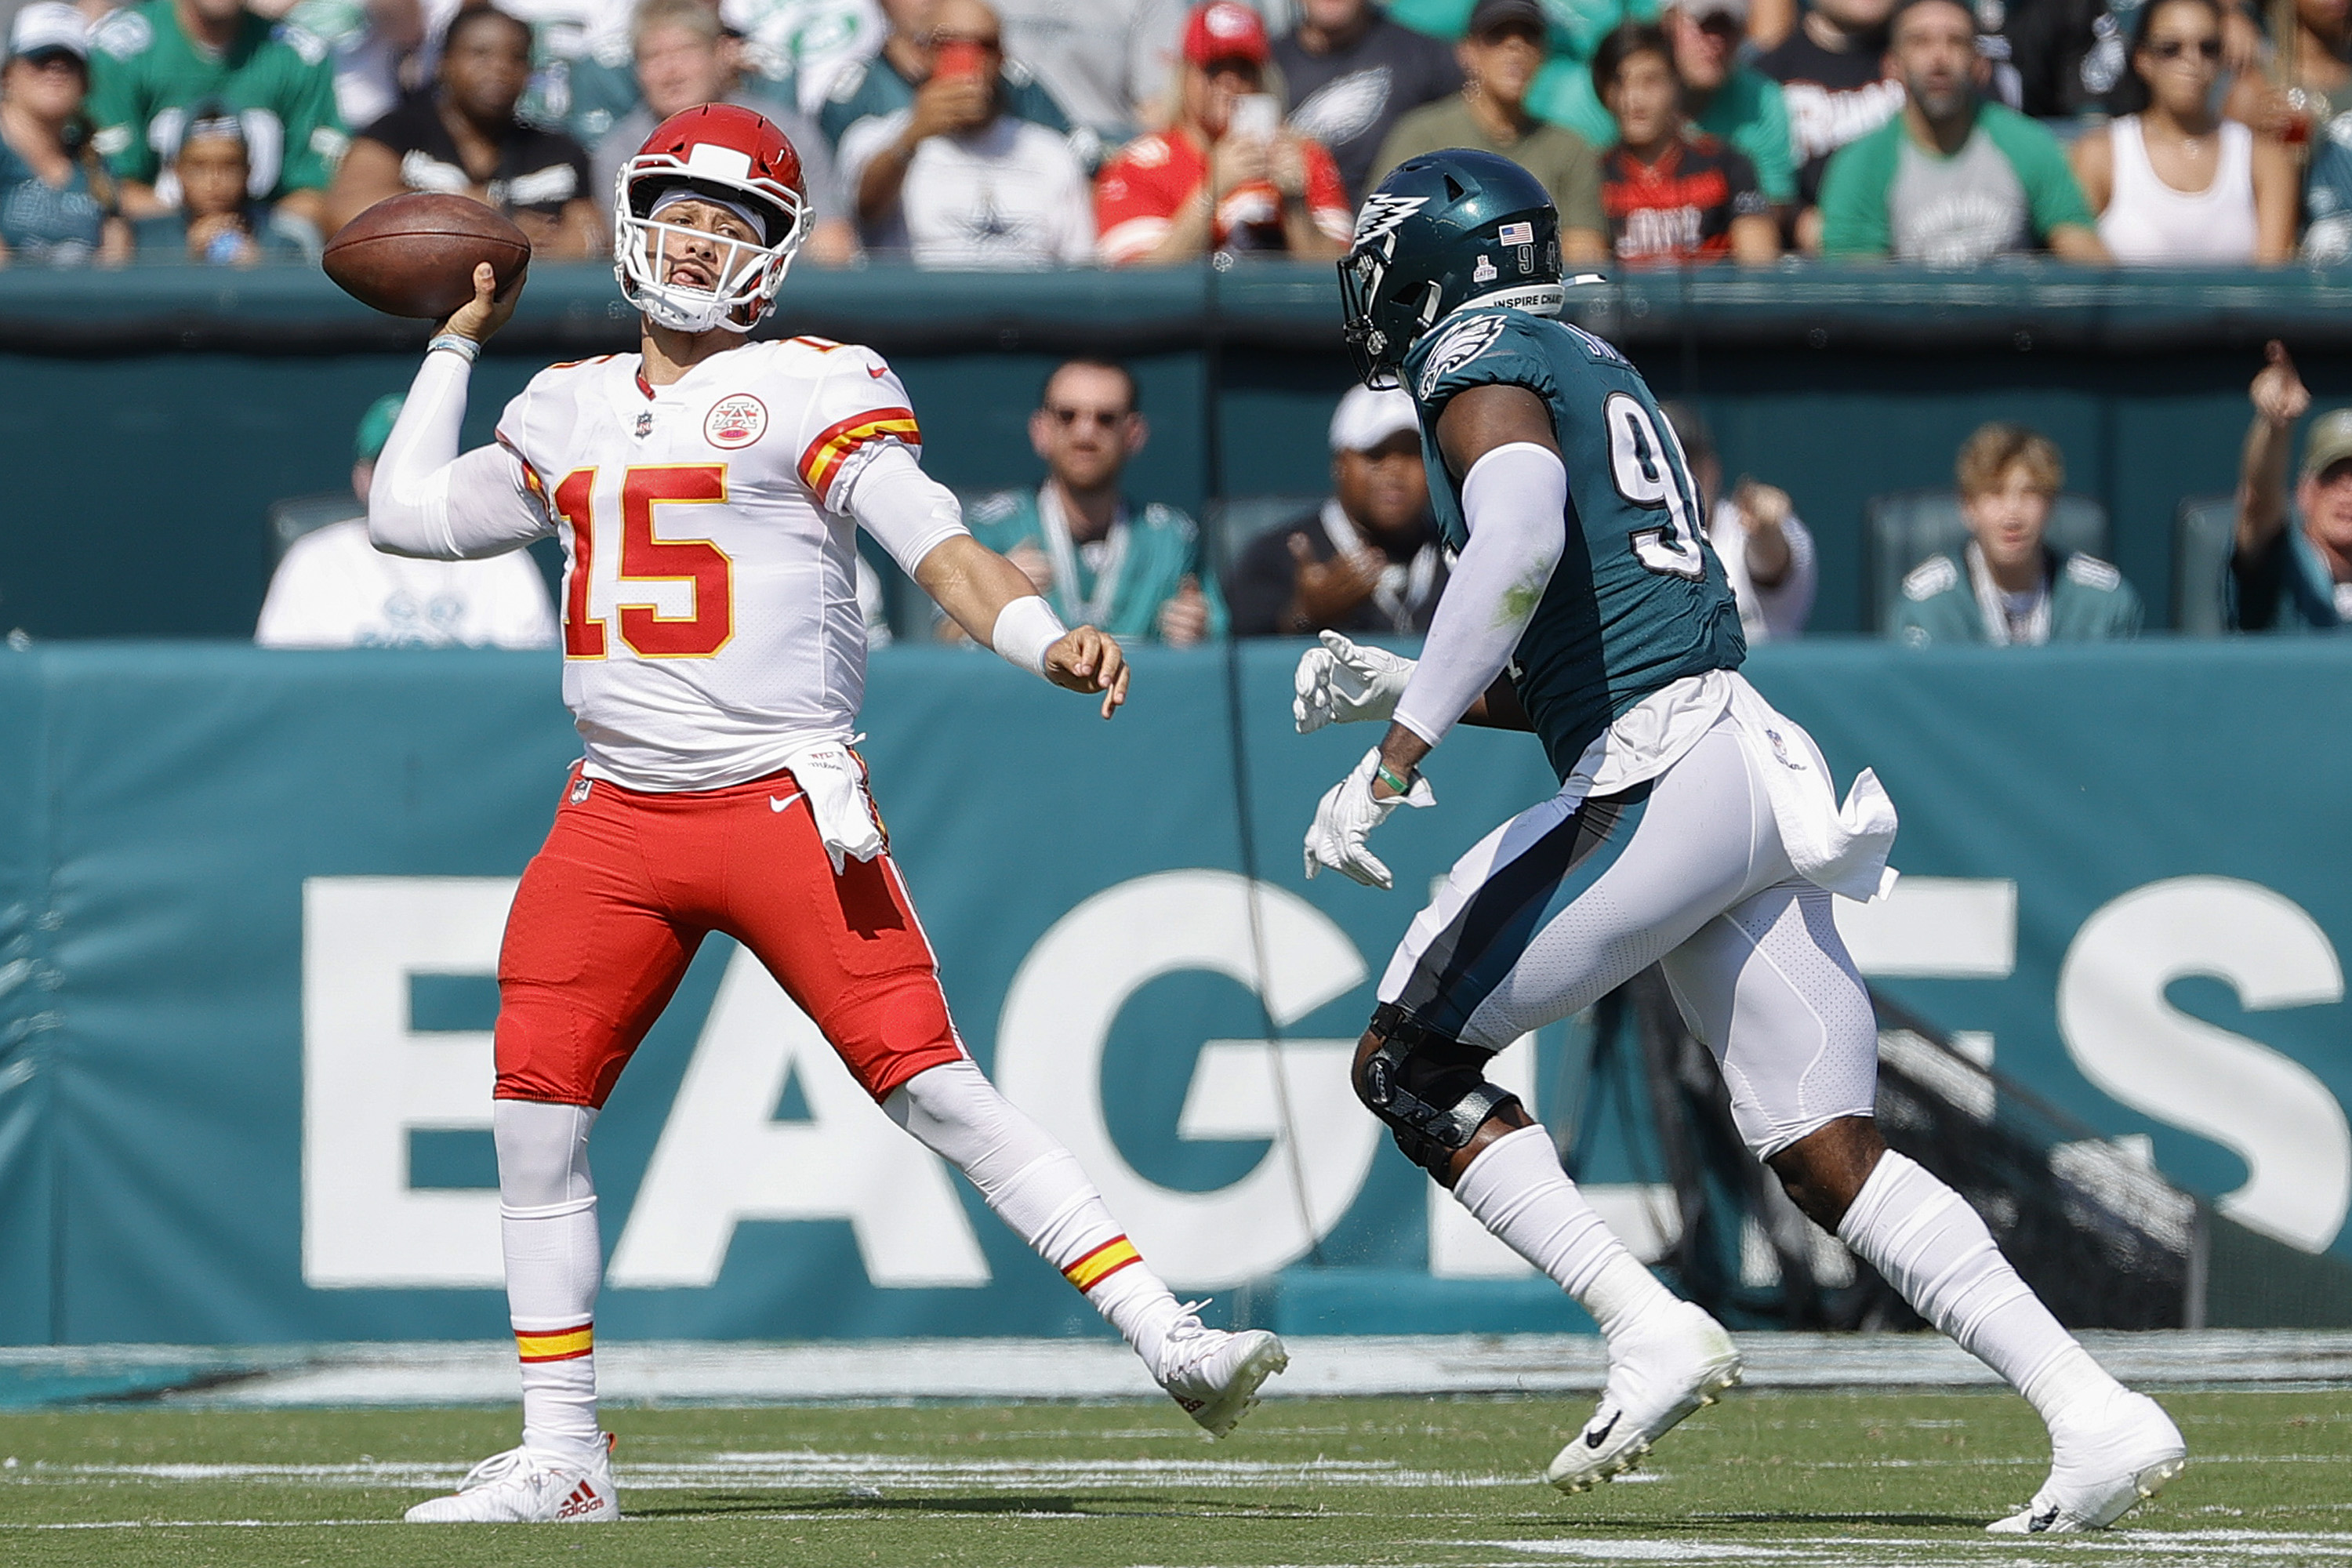 Chiefs vs. Eagles: 5 storylines to watch for Super Bowl LVII matchup